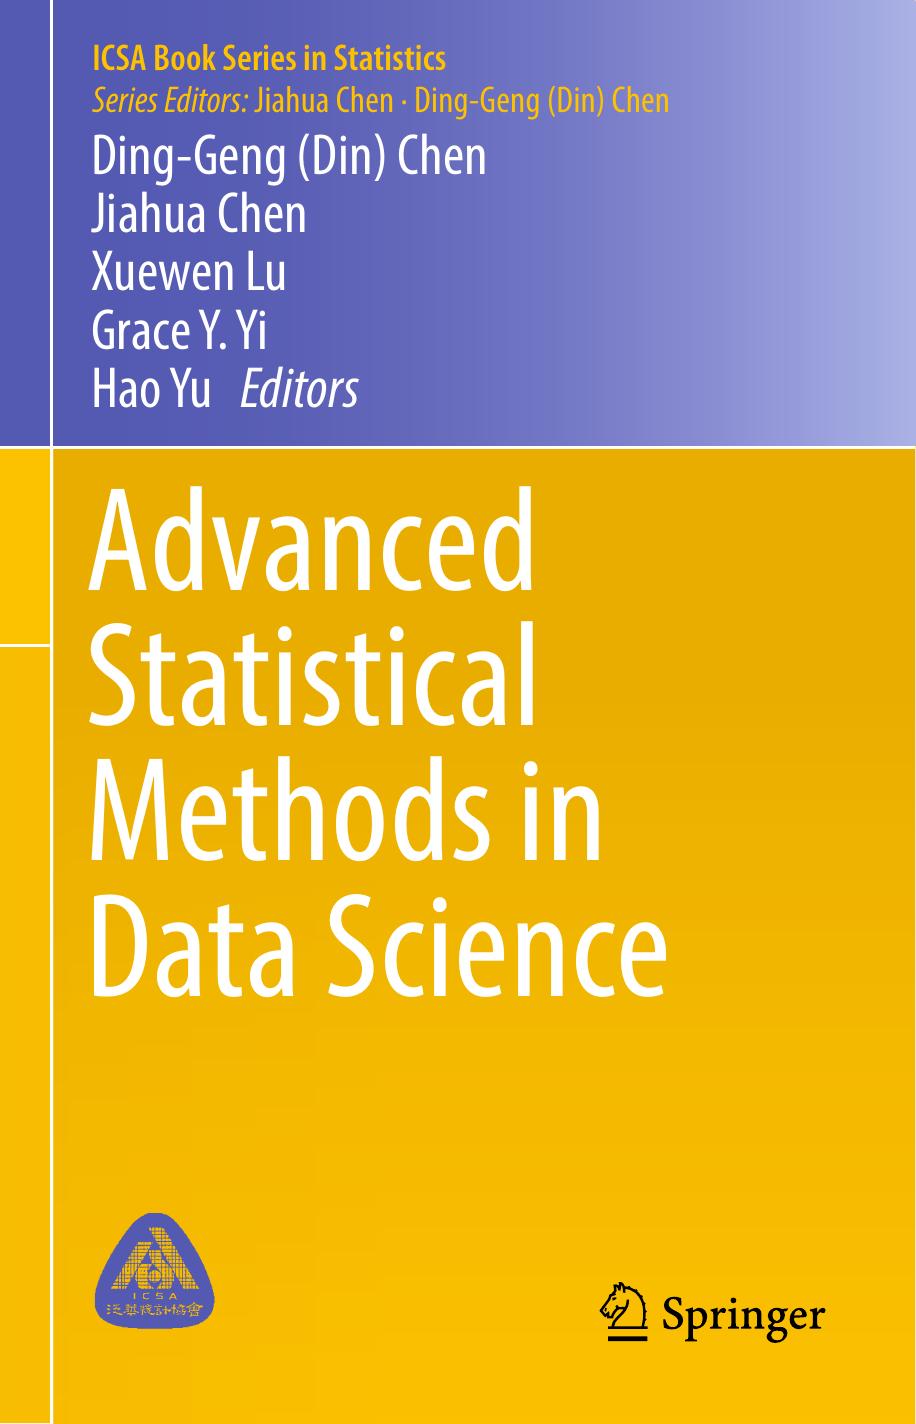 Advanced Statistical Methods in Data Science 2016.pdf